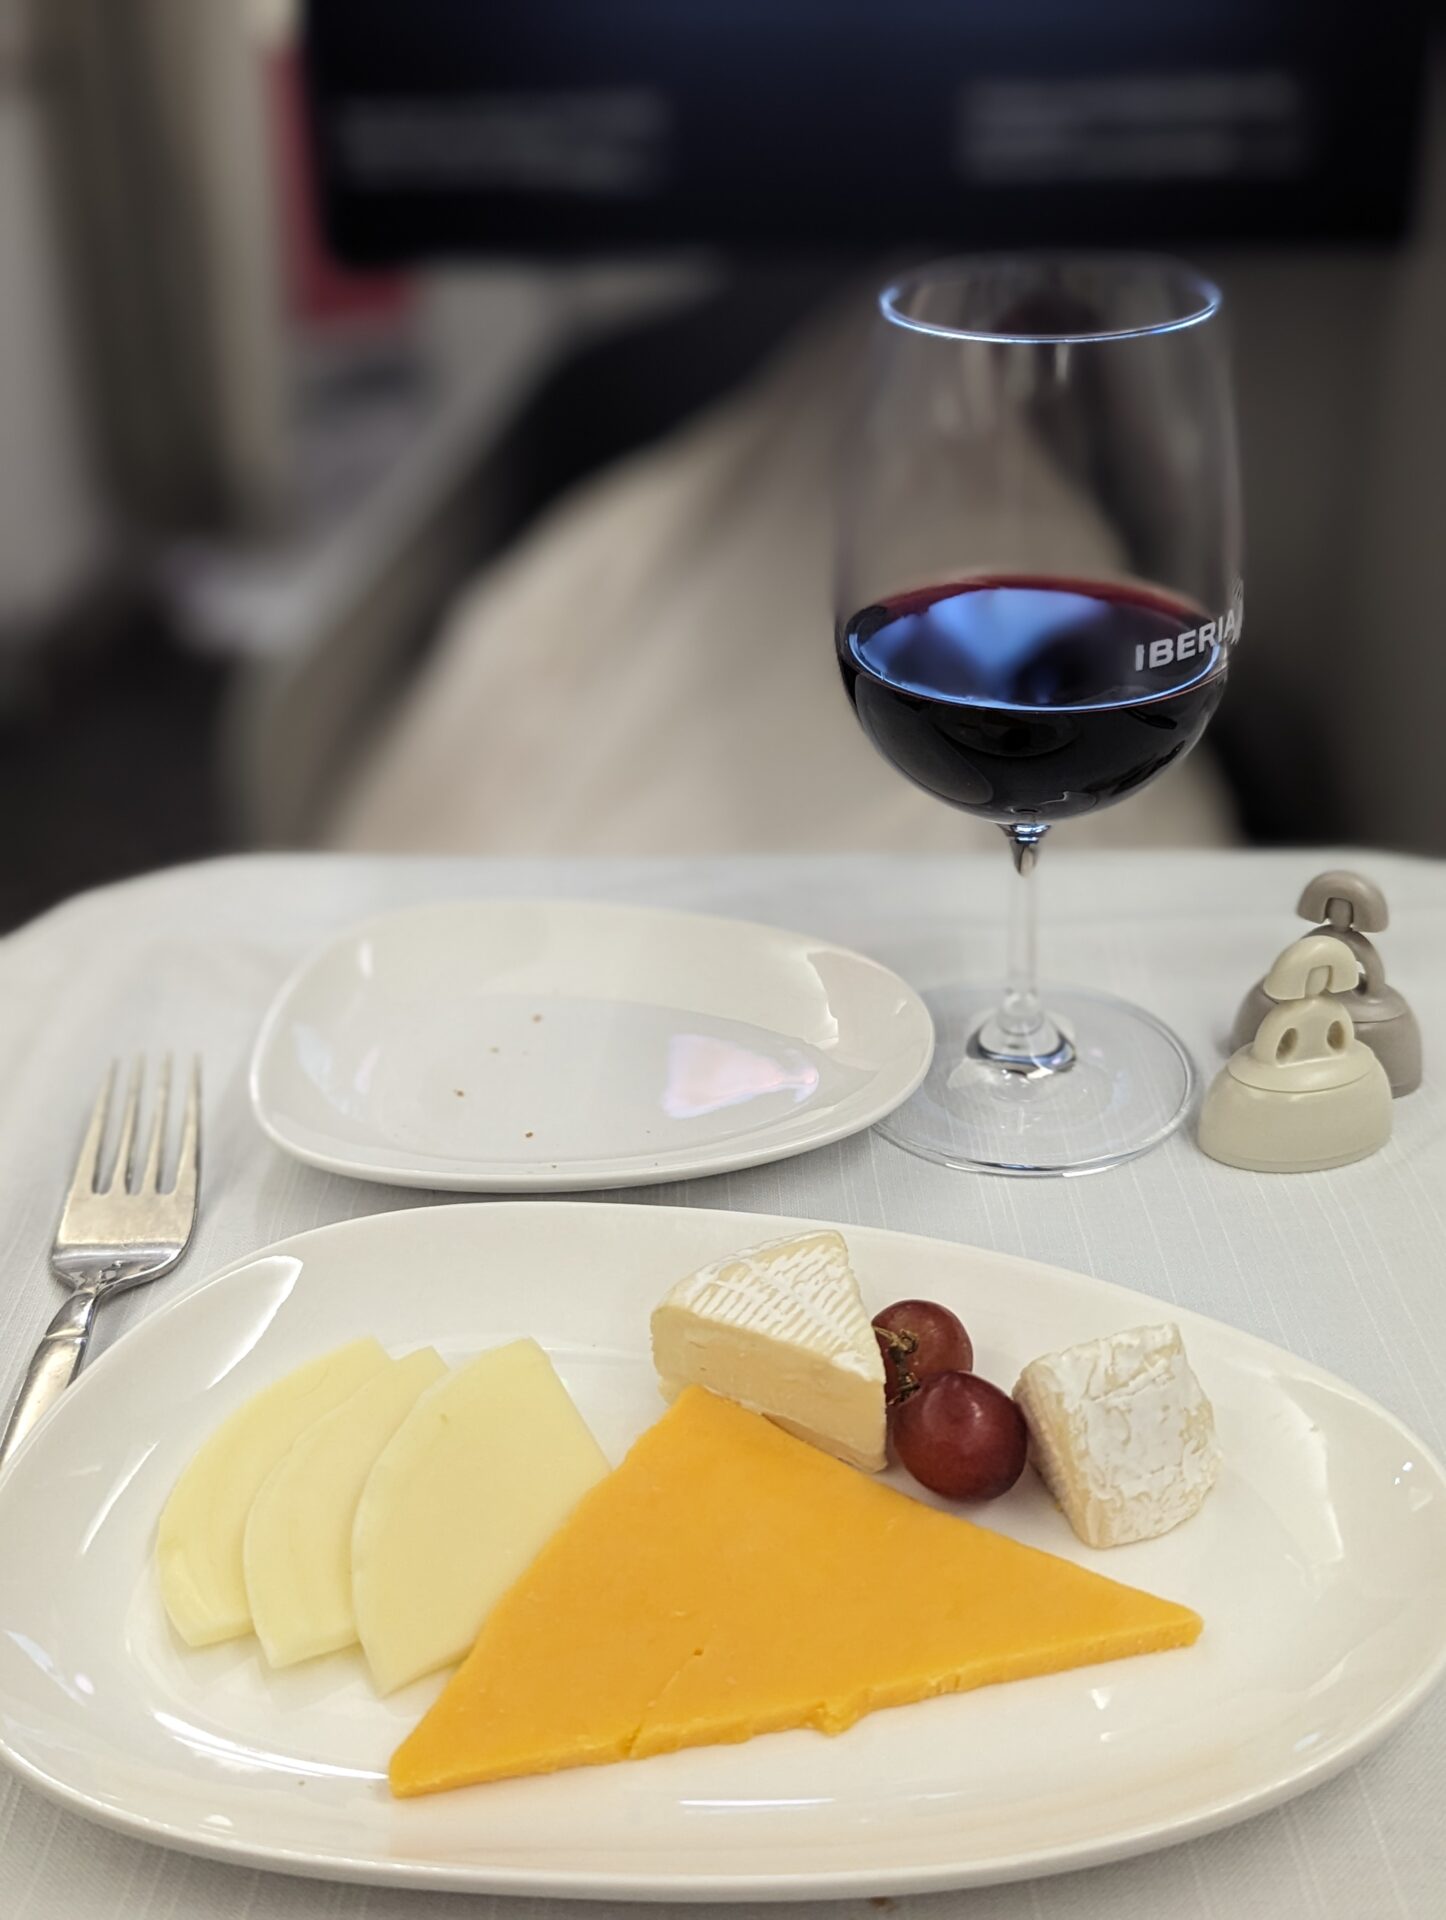 a plate of cheese and grapes on a table with a glass of wine